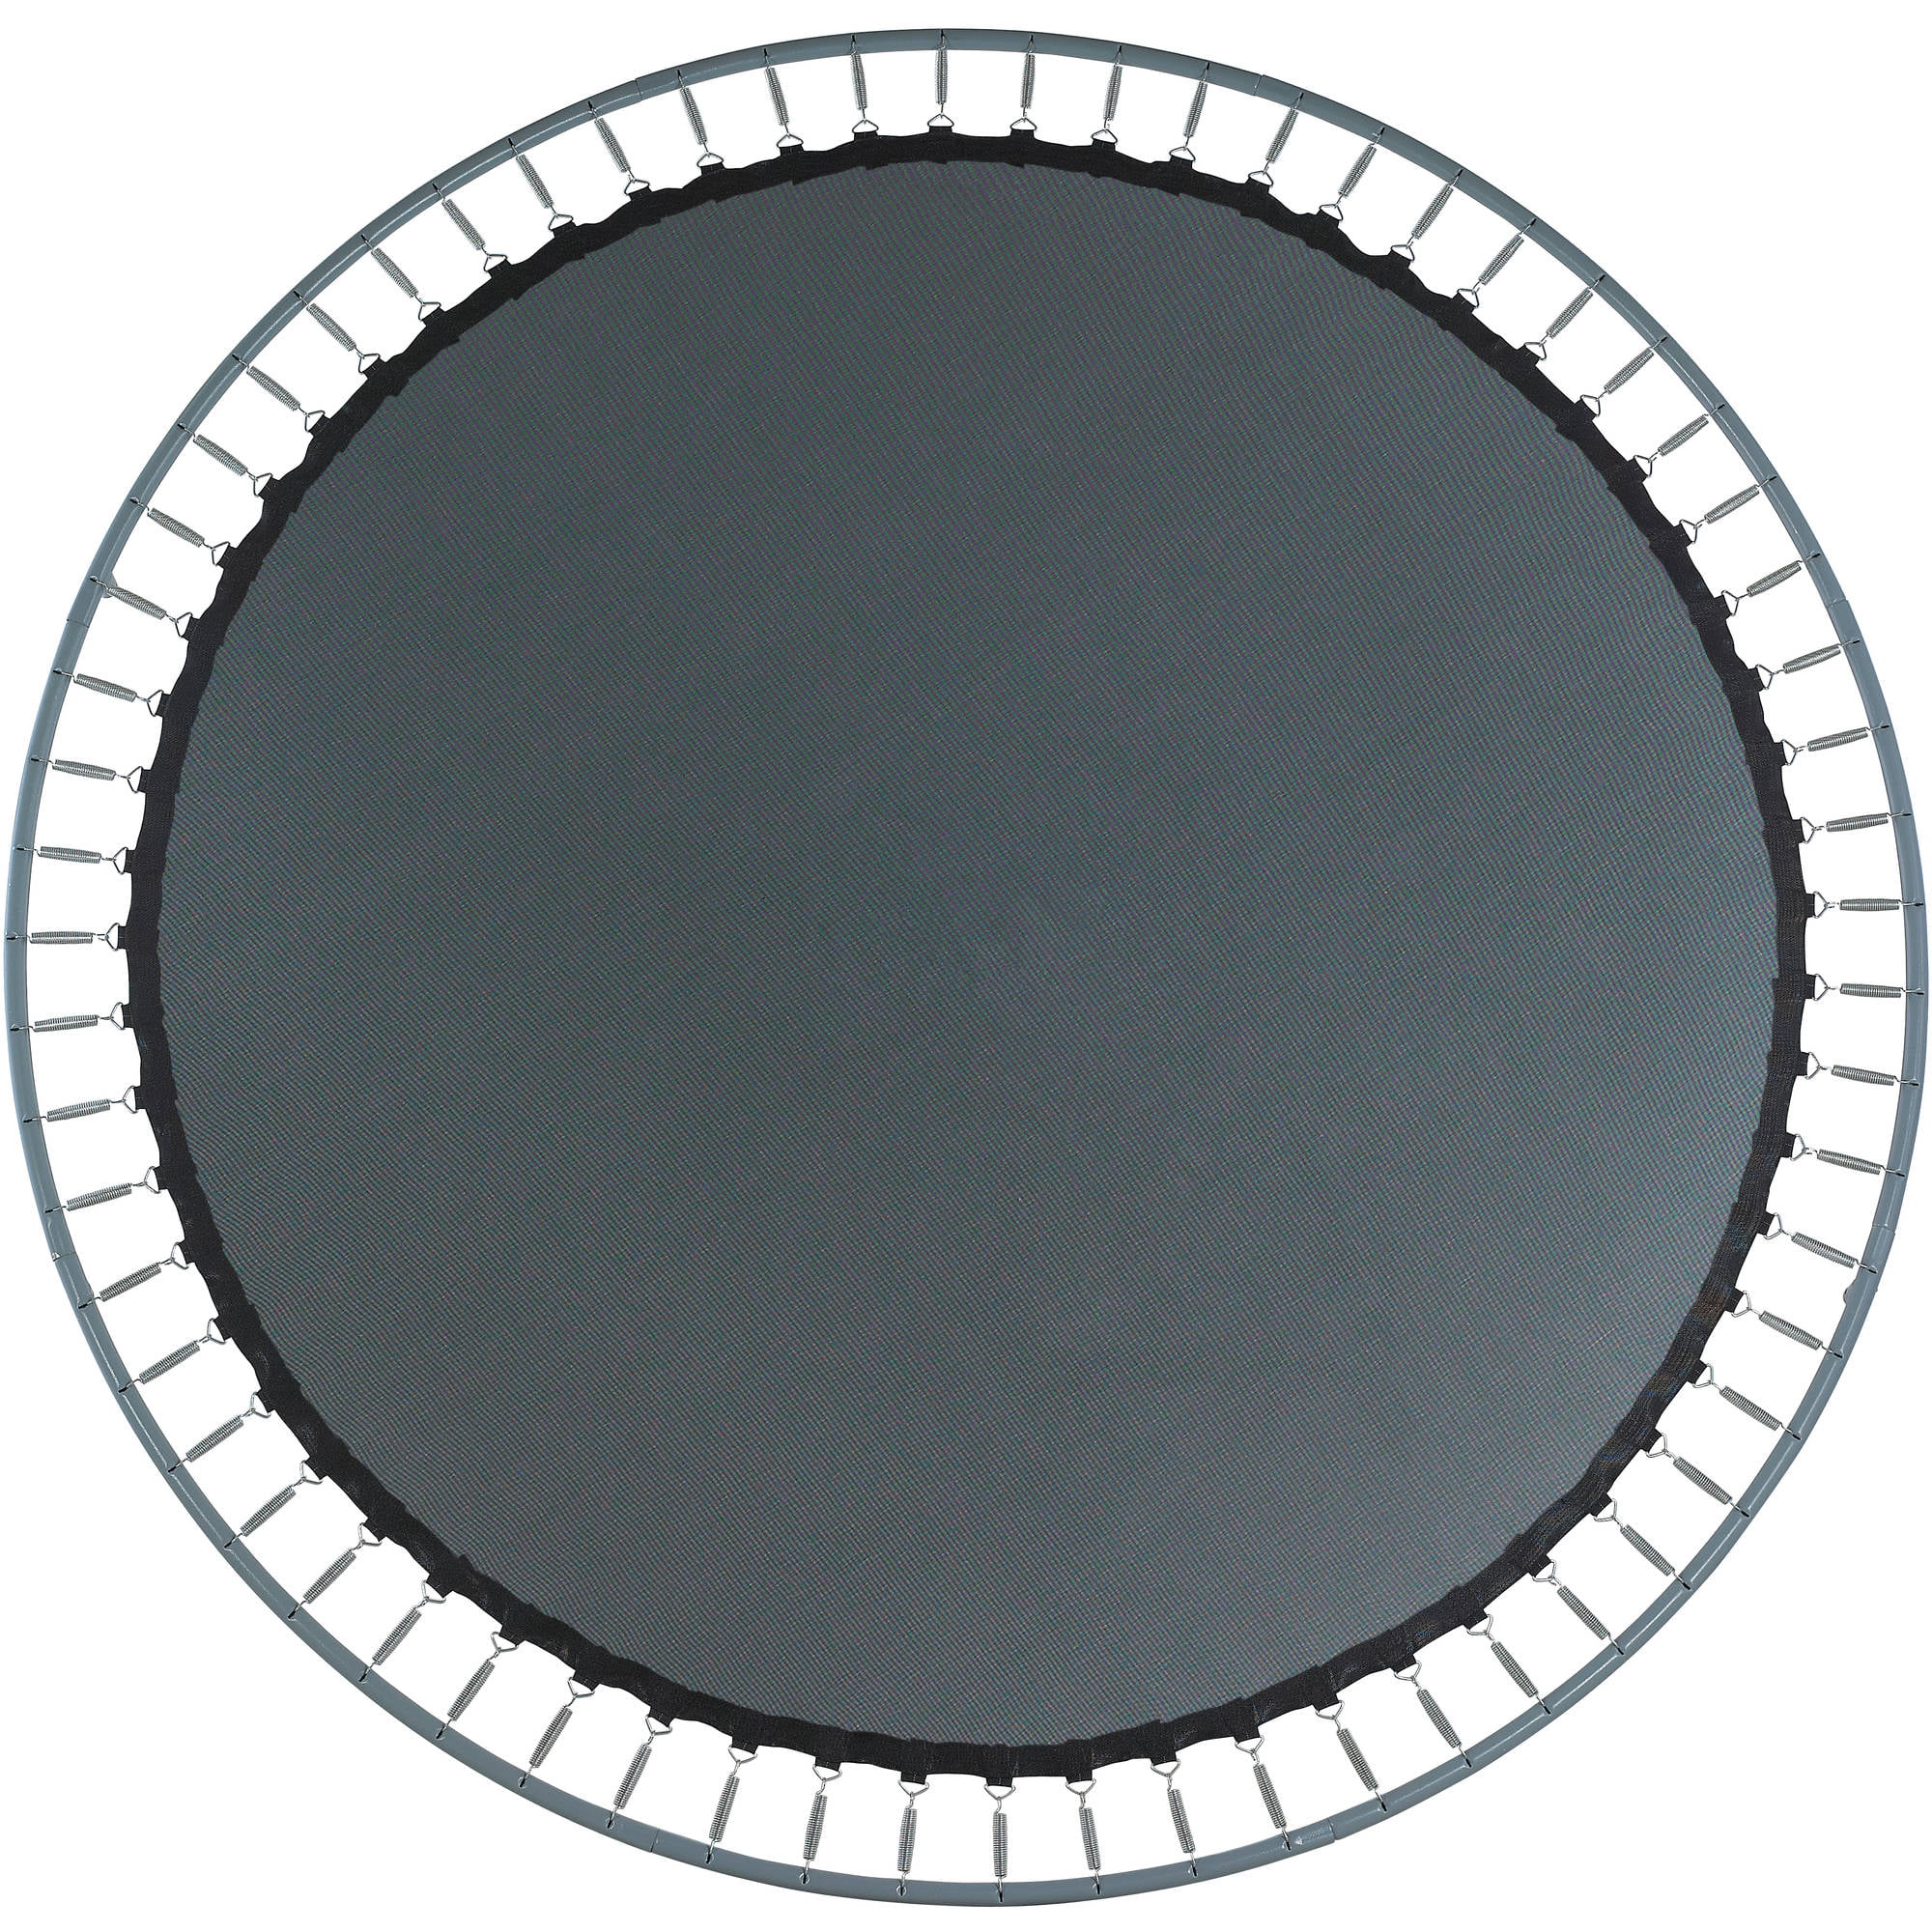 Trampoline Repair Mat Replacement Round Jumping Pad Cloth with V-rings Spring 